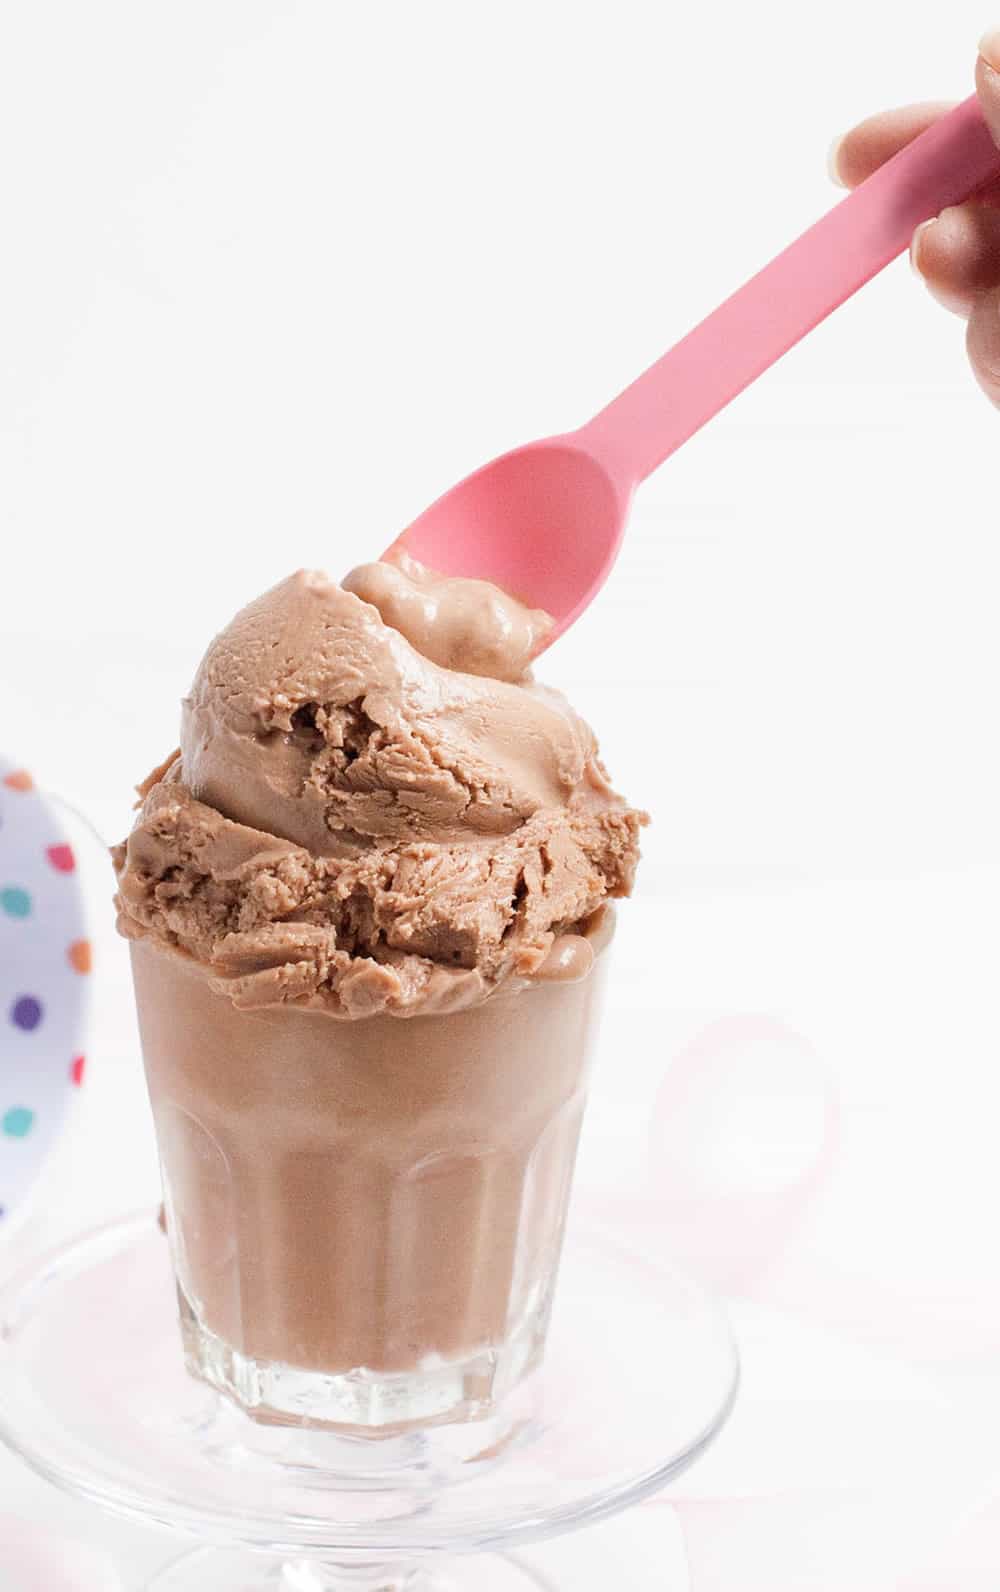 No Churn Nutella Cheesecake Ice Cream. A NEW kind of no churn ice cream made with whipped cream and cream cheese! Super rich, creamy and delicious!